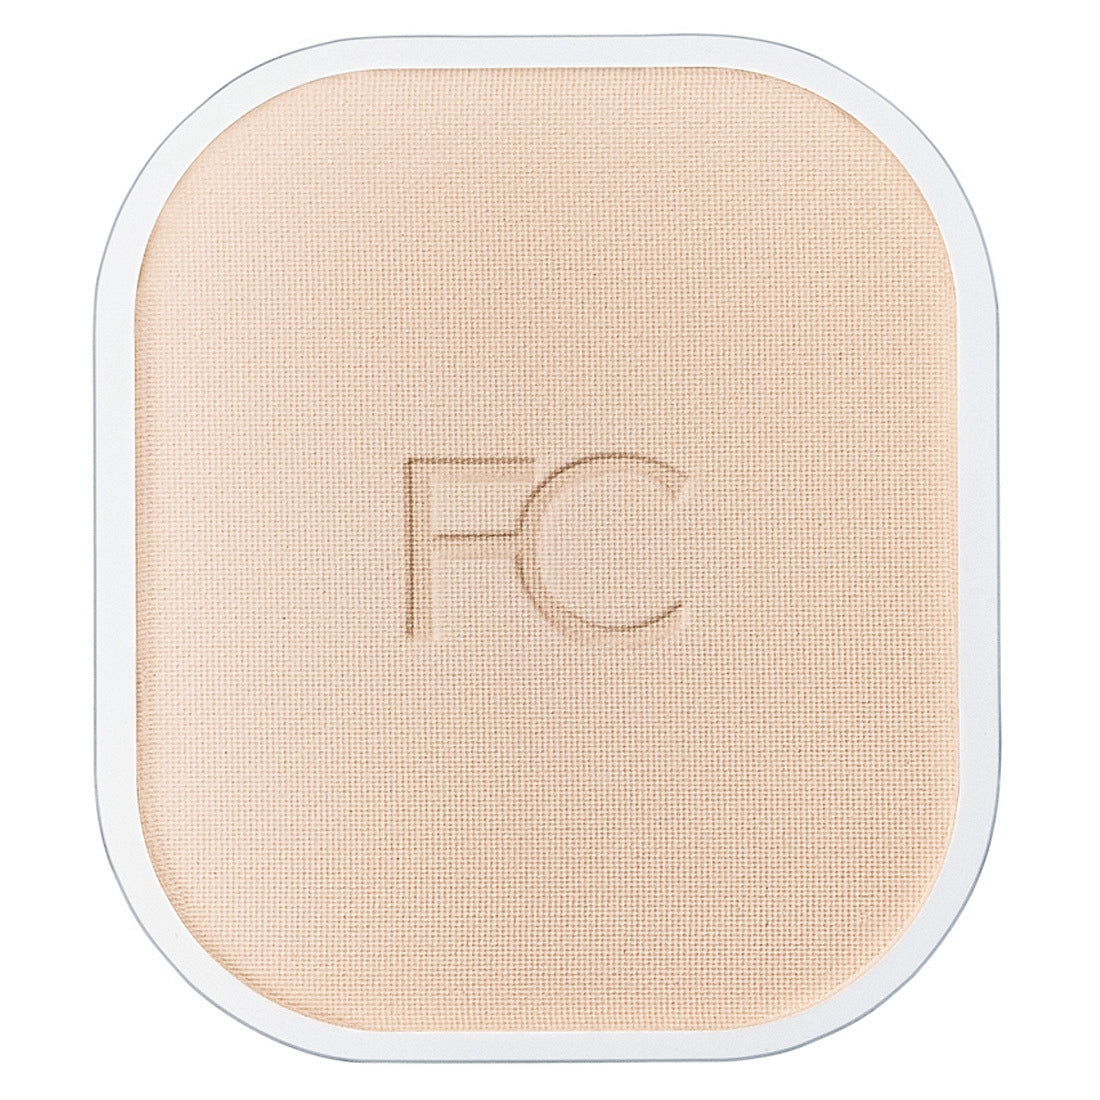 FANCL Reset Powder (refill) product image picture.